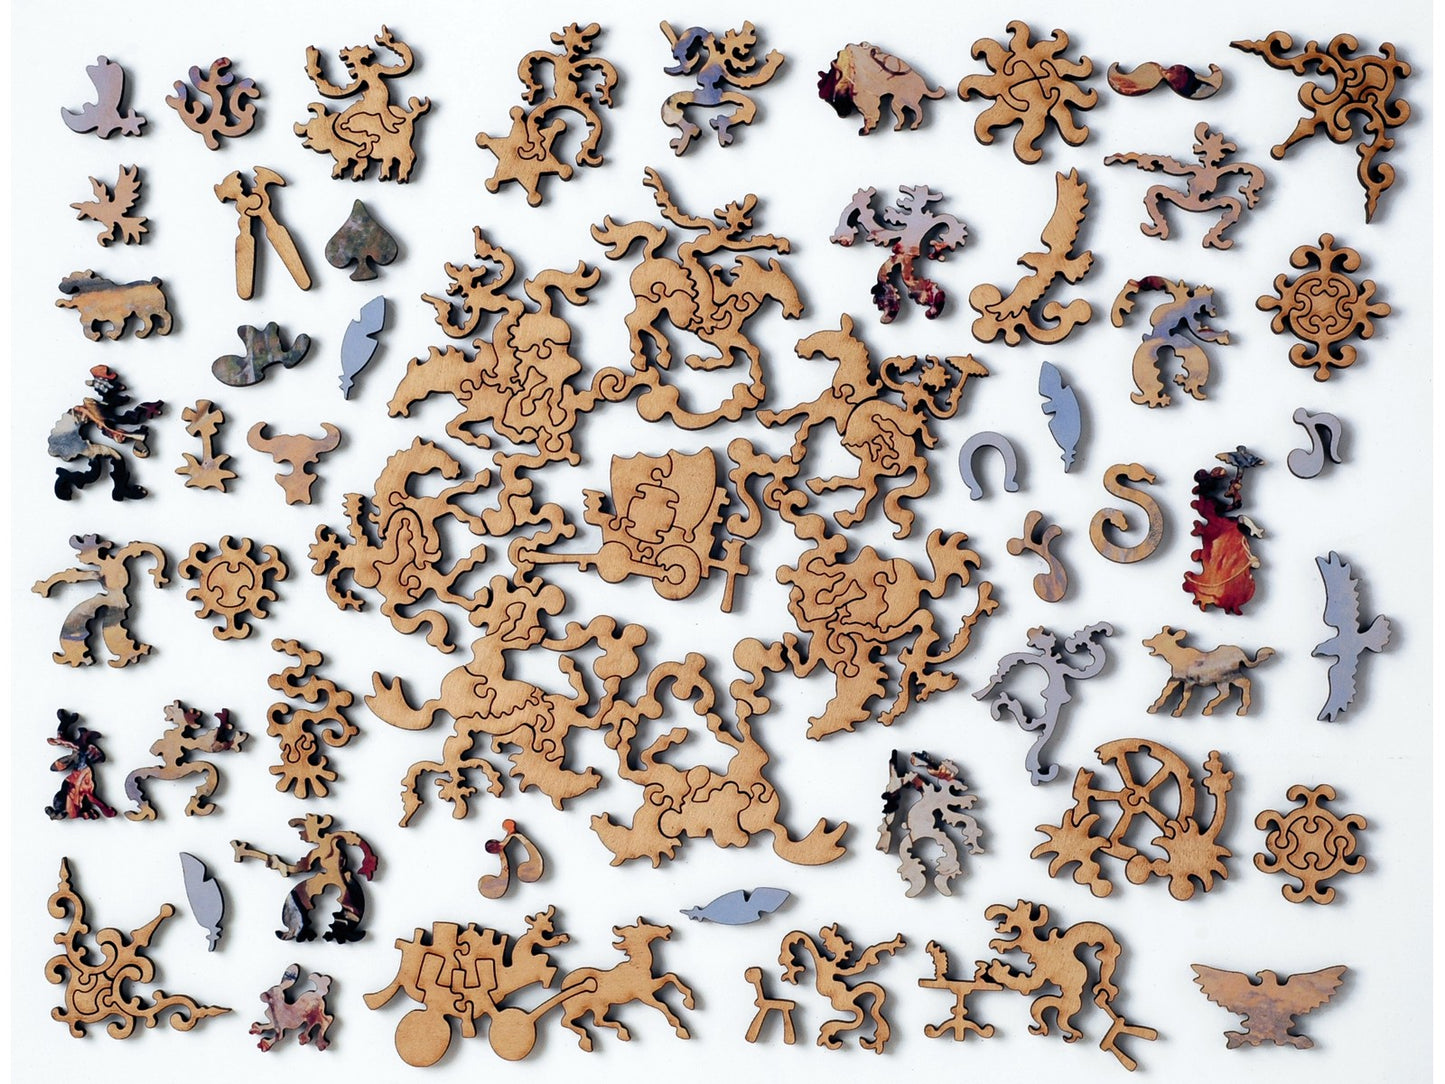 The whimsy pieces that can be found in the puzzle, A Dash for the Timber.